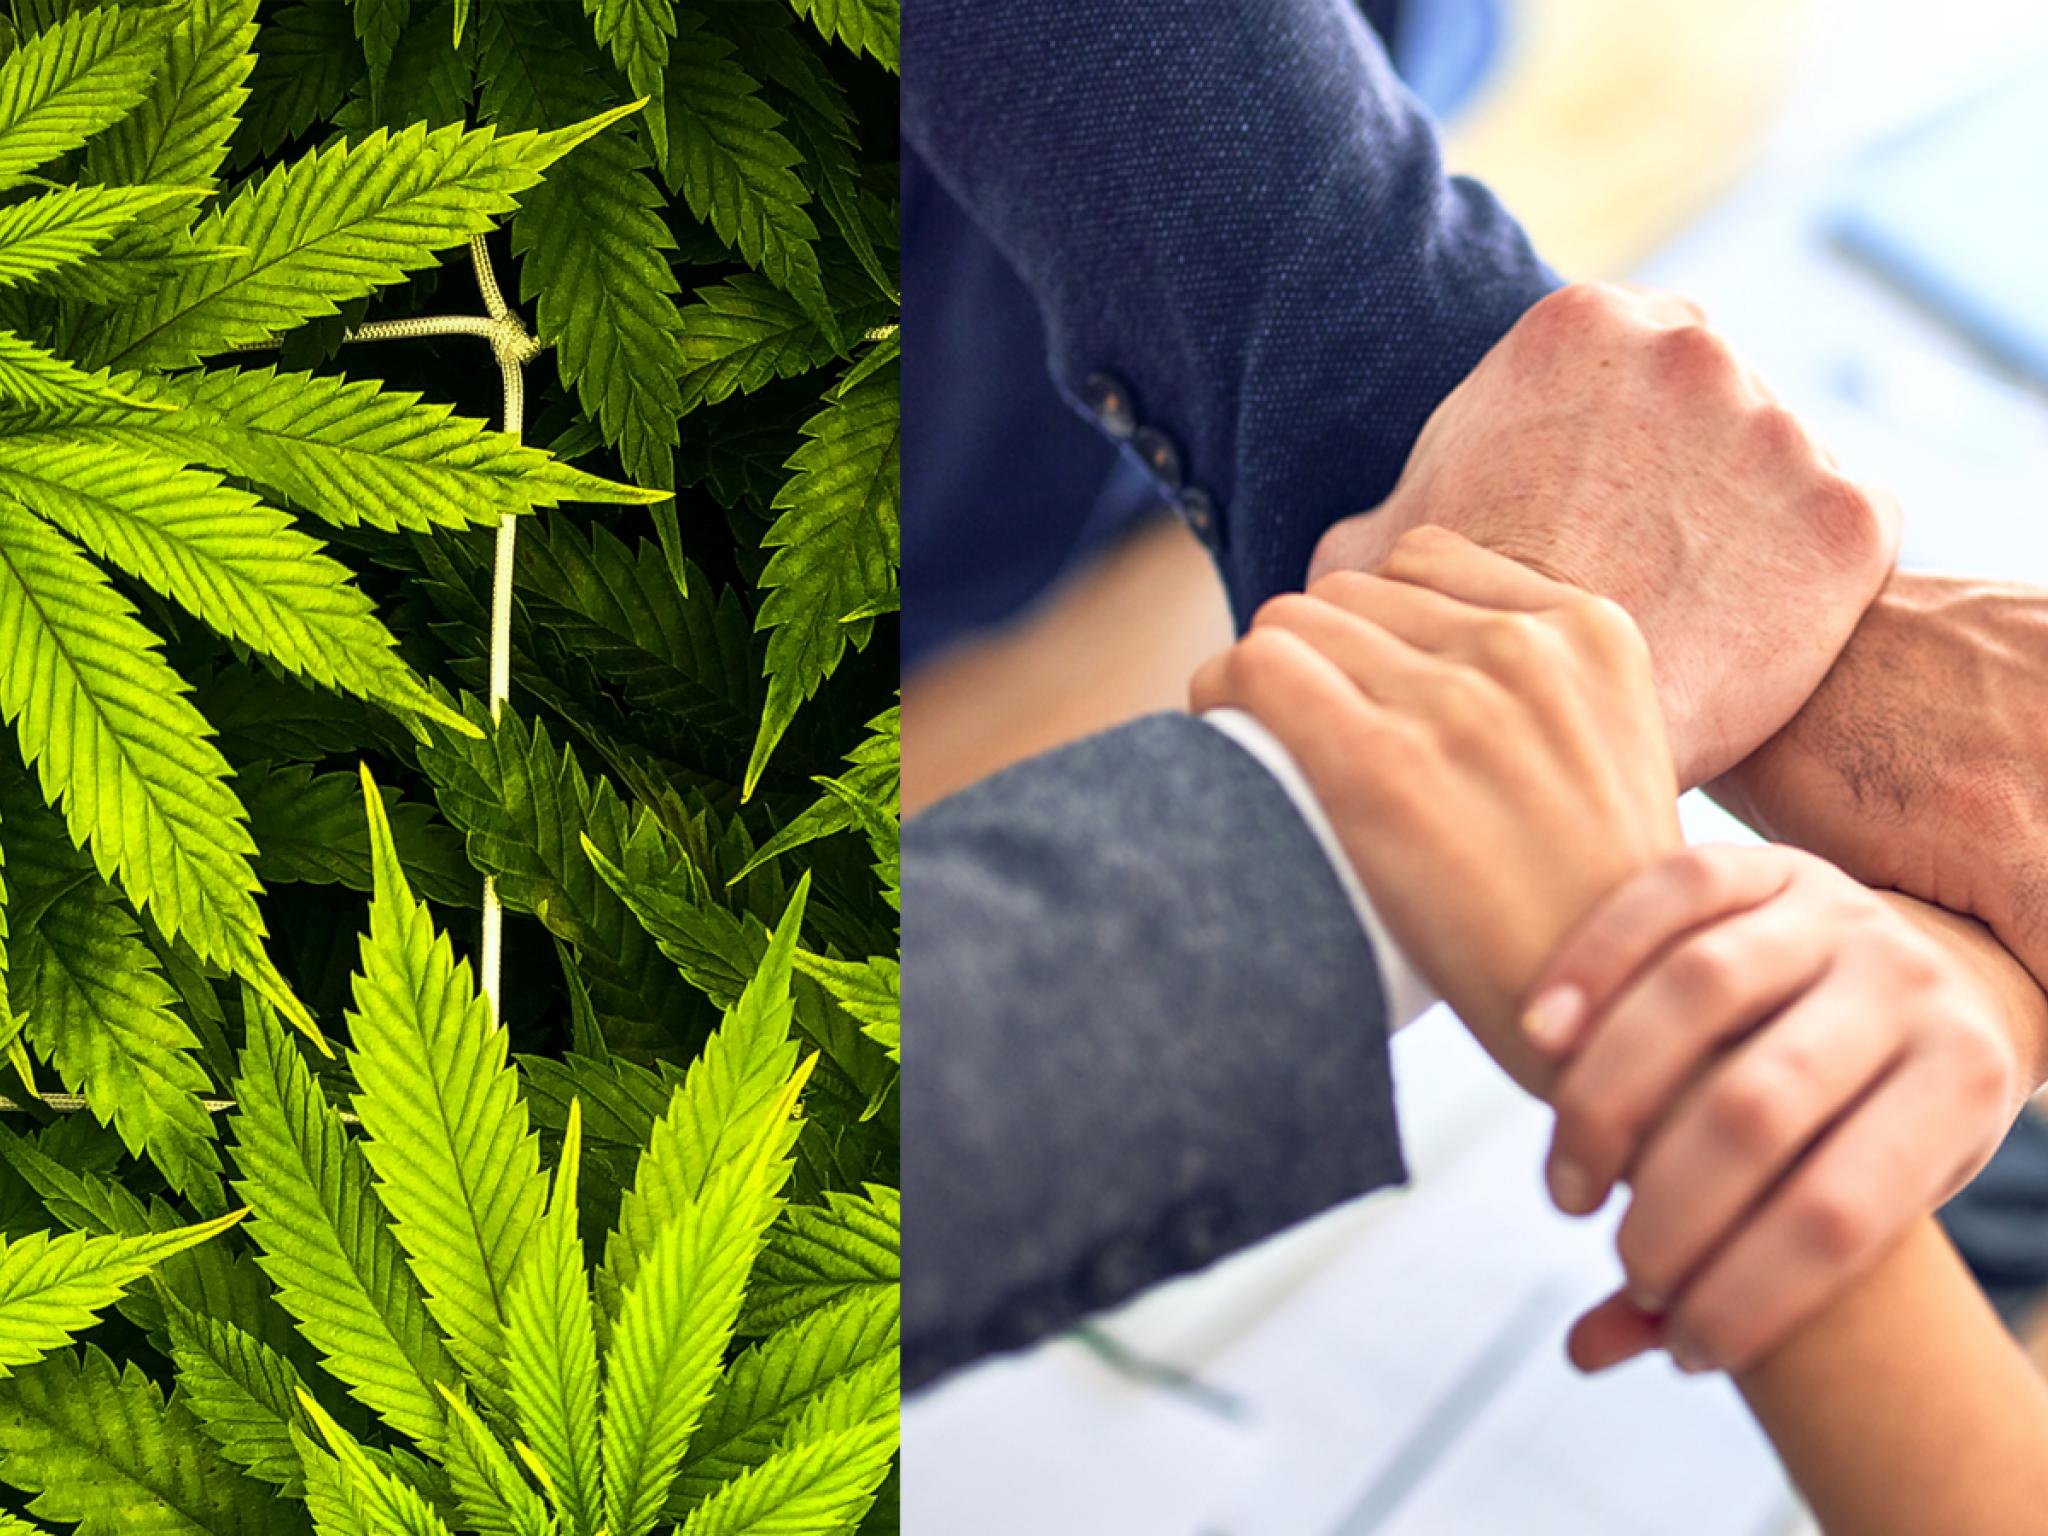  cannabis-industry-learns-lesson-as-teamsters-union-flexes-its-muscles 